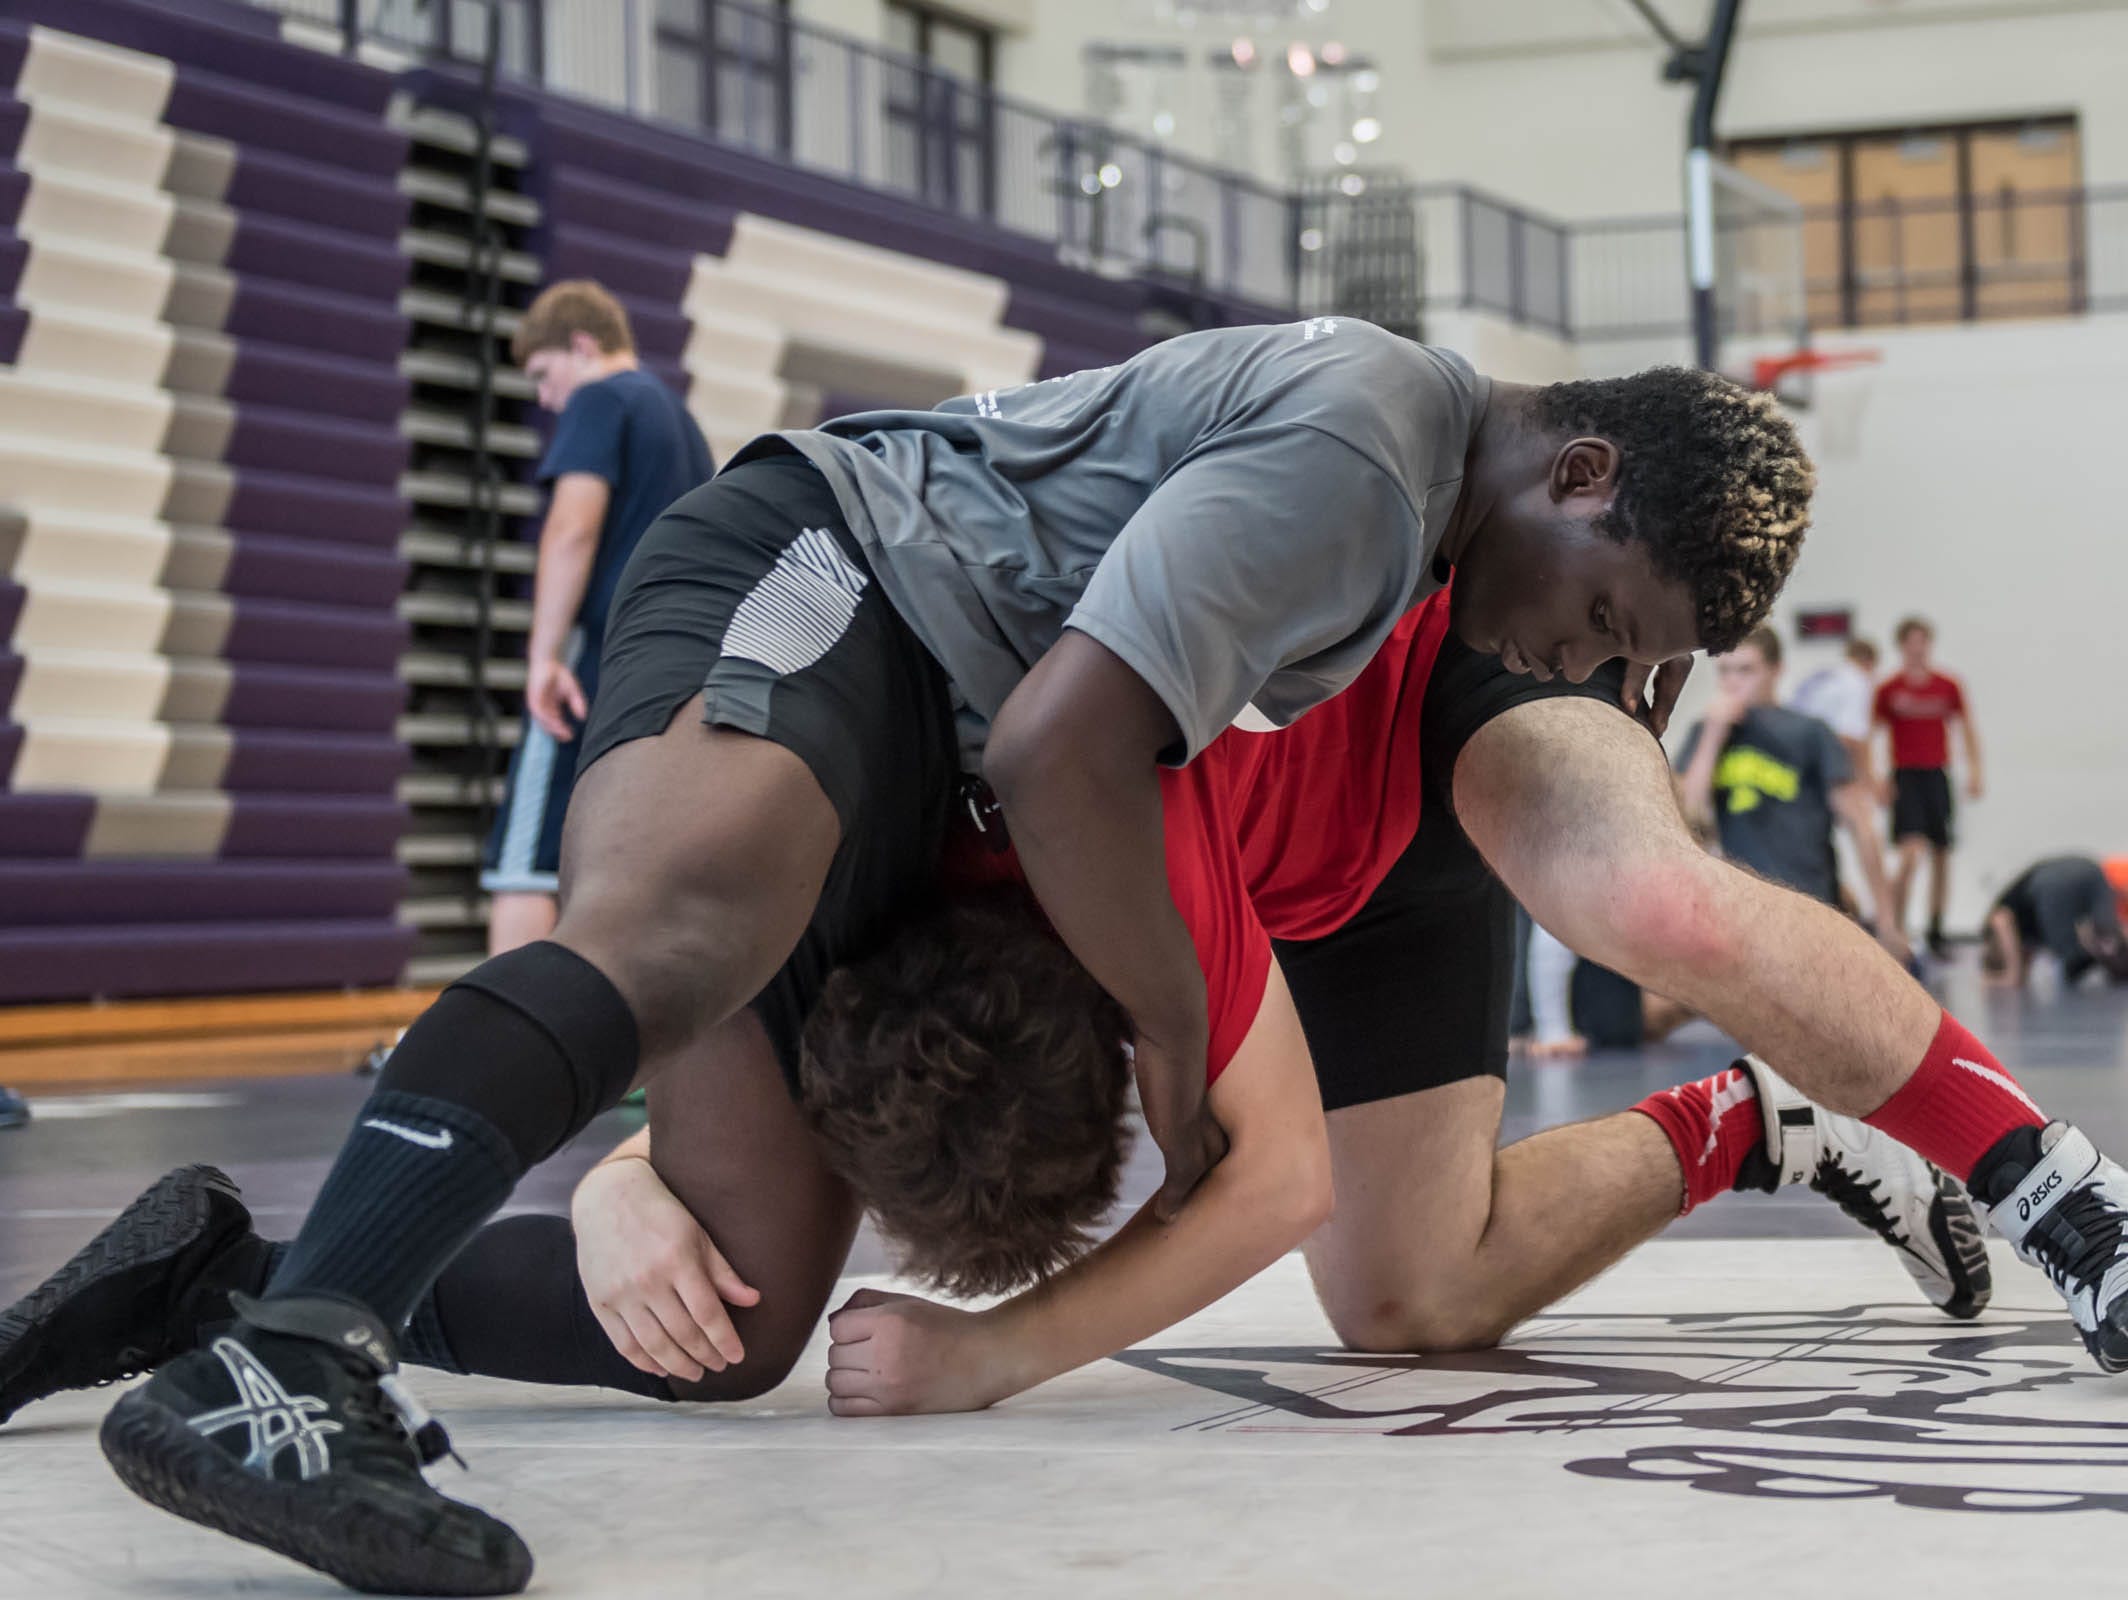 Lakeview's Stephan Moody works on some of his moves at Rob Waller's All American Wrestling Camps at Lakeview High School on Wednesday.